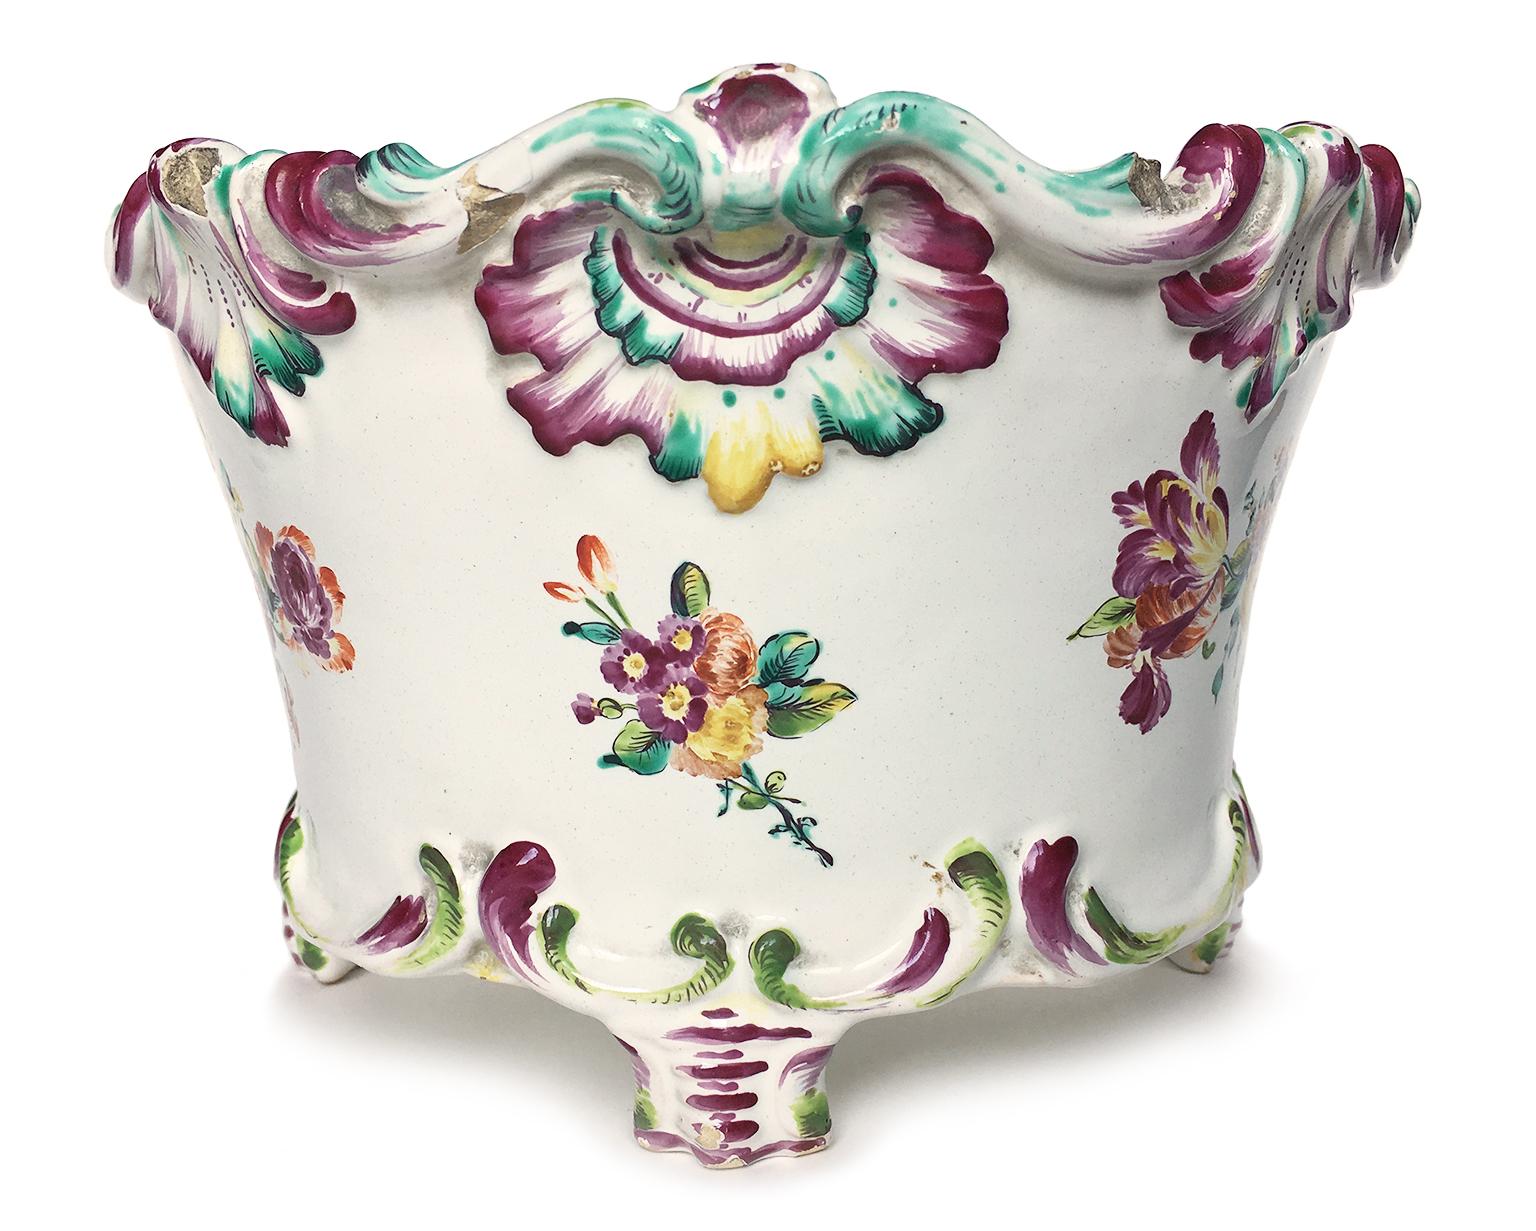 Maiolica flower pot “a mezzaluna” with support feet 
decorated with little bunches of flowers

Pasquale Rubati Factory
Milan, circa 1770
5.5 in X 5 in X 8.6 in 
14 cm x 12.7 cm x 22 cm
lb 1.76 (kg 0.8)

State of conservation: intact with slight